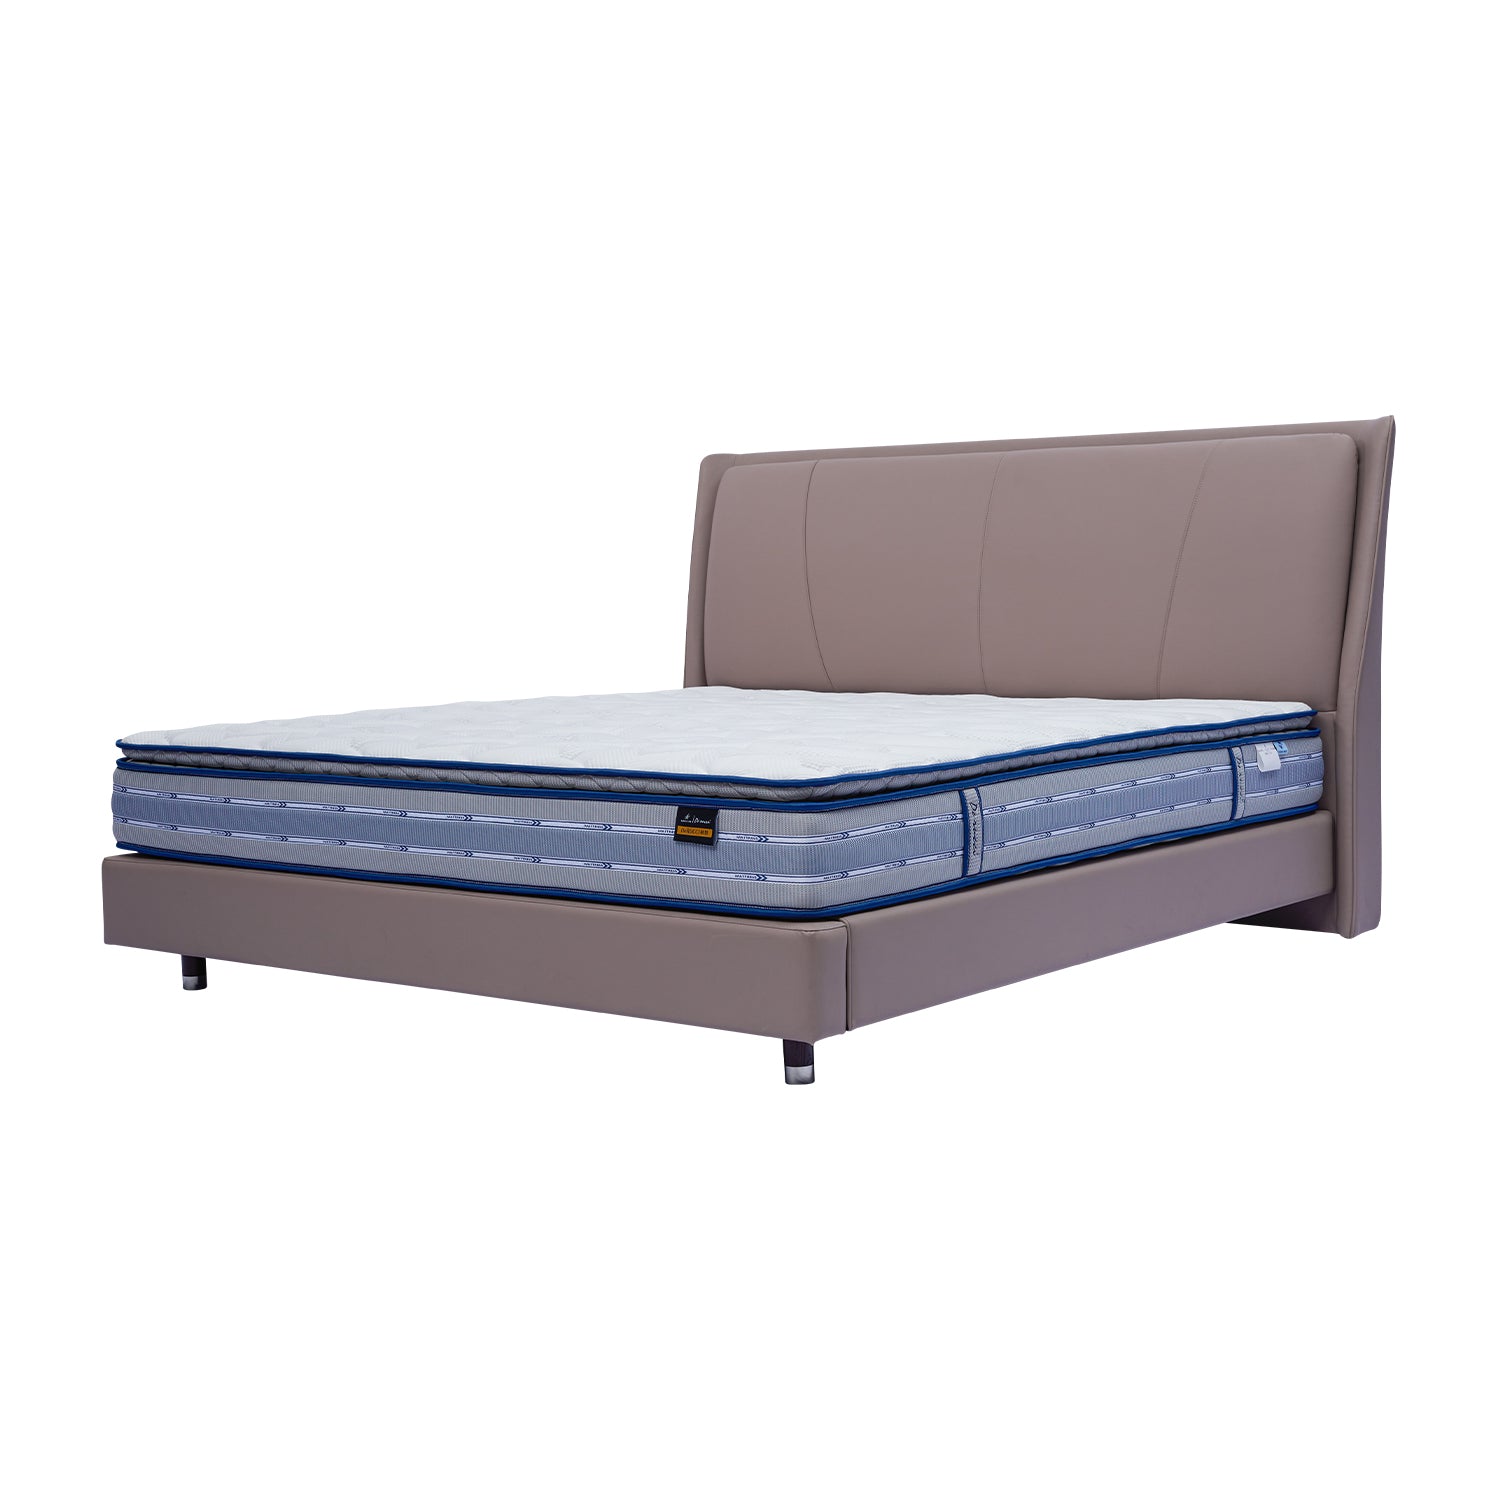 DeRUCCI Bed Frame BOC1-018 with beige leather headboard and sides, paired with a blue and white mattress, highlighting modern and sturdy design.